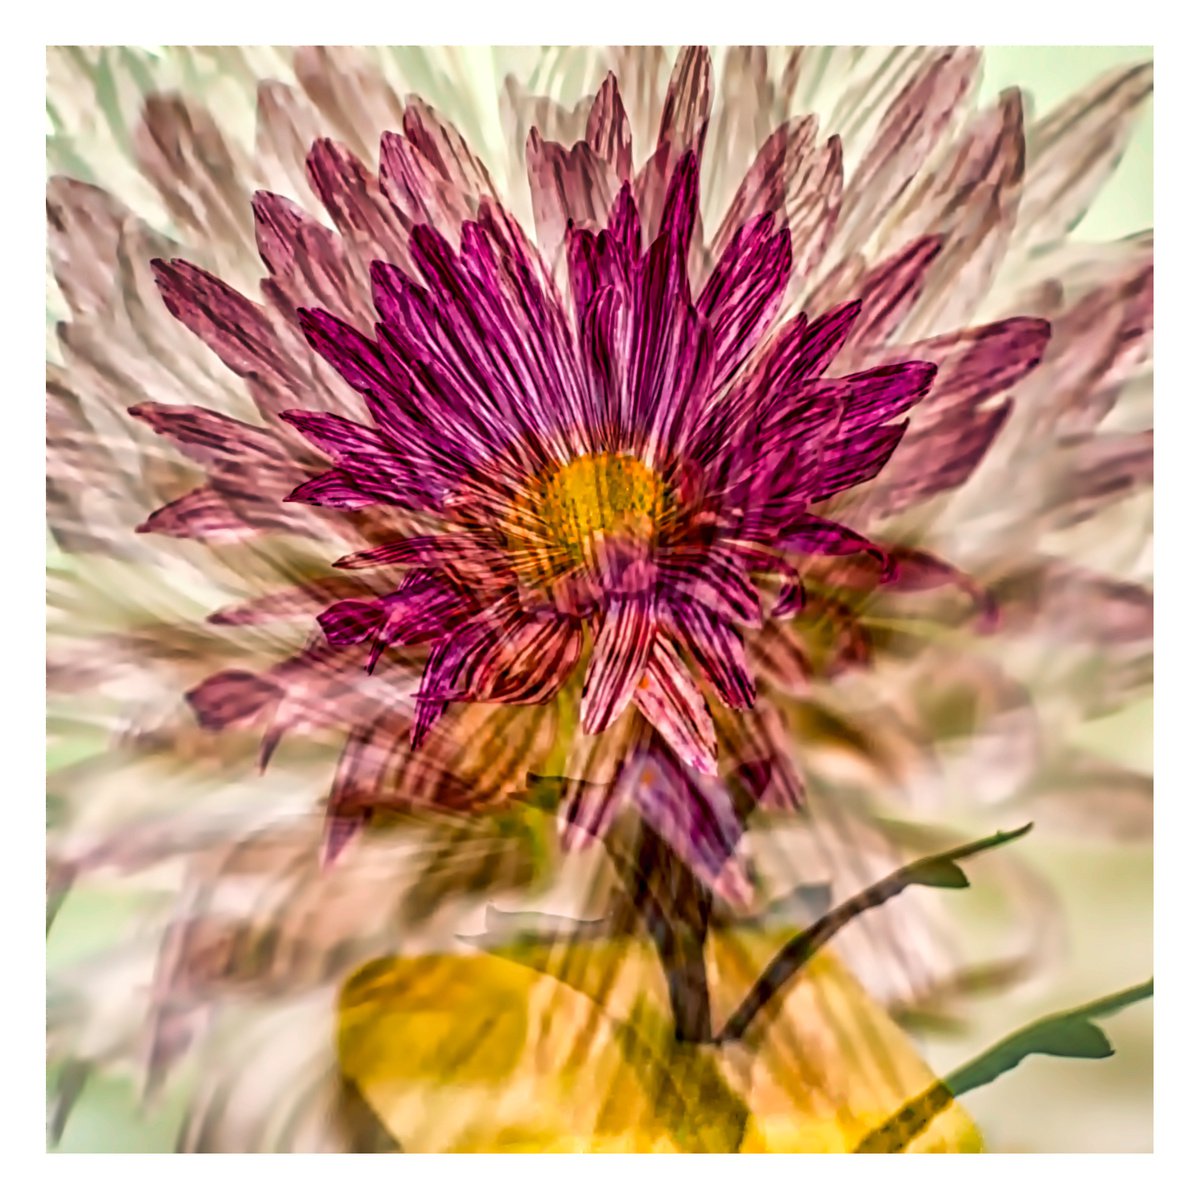 Abstract Flowers #2. Limited Edition 1/25 12x12 inch Photographic Print. by Graham Briggs